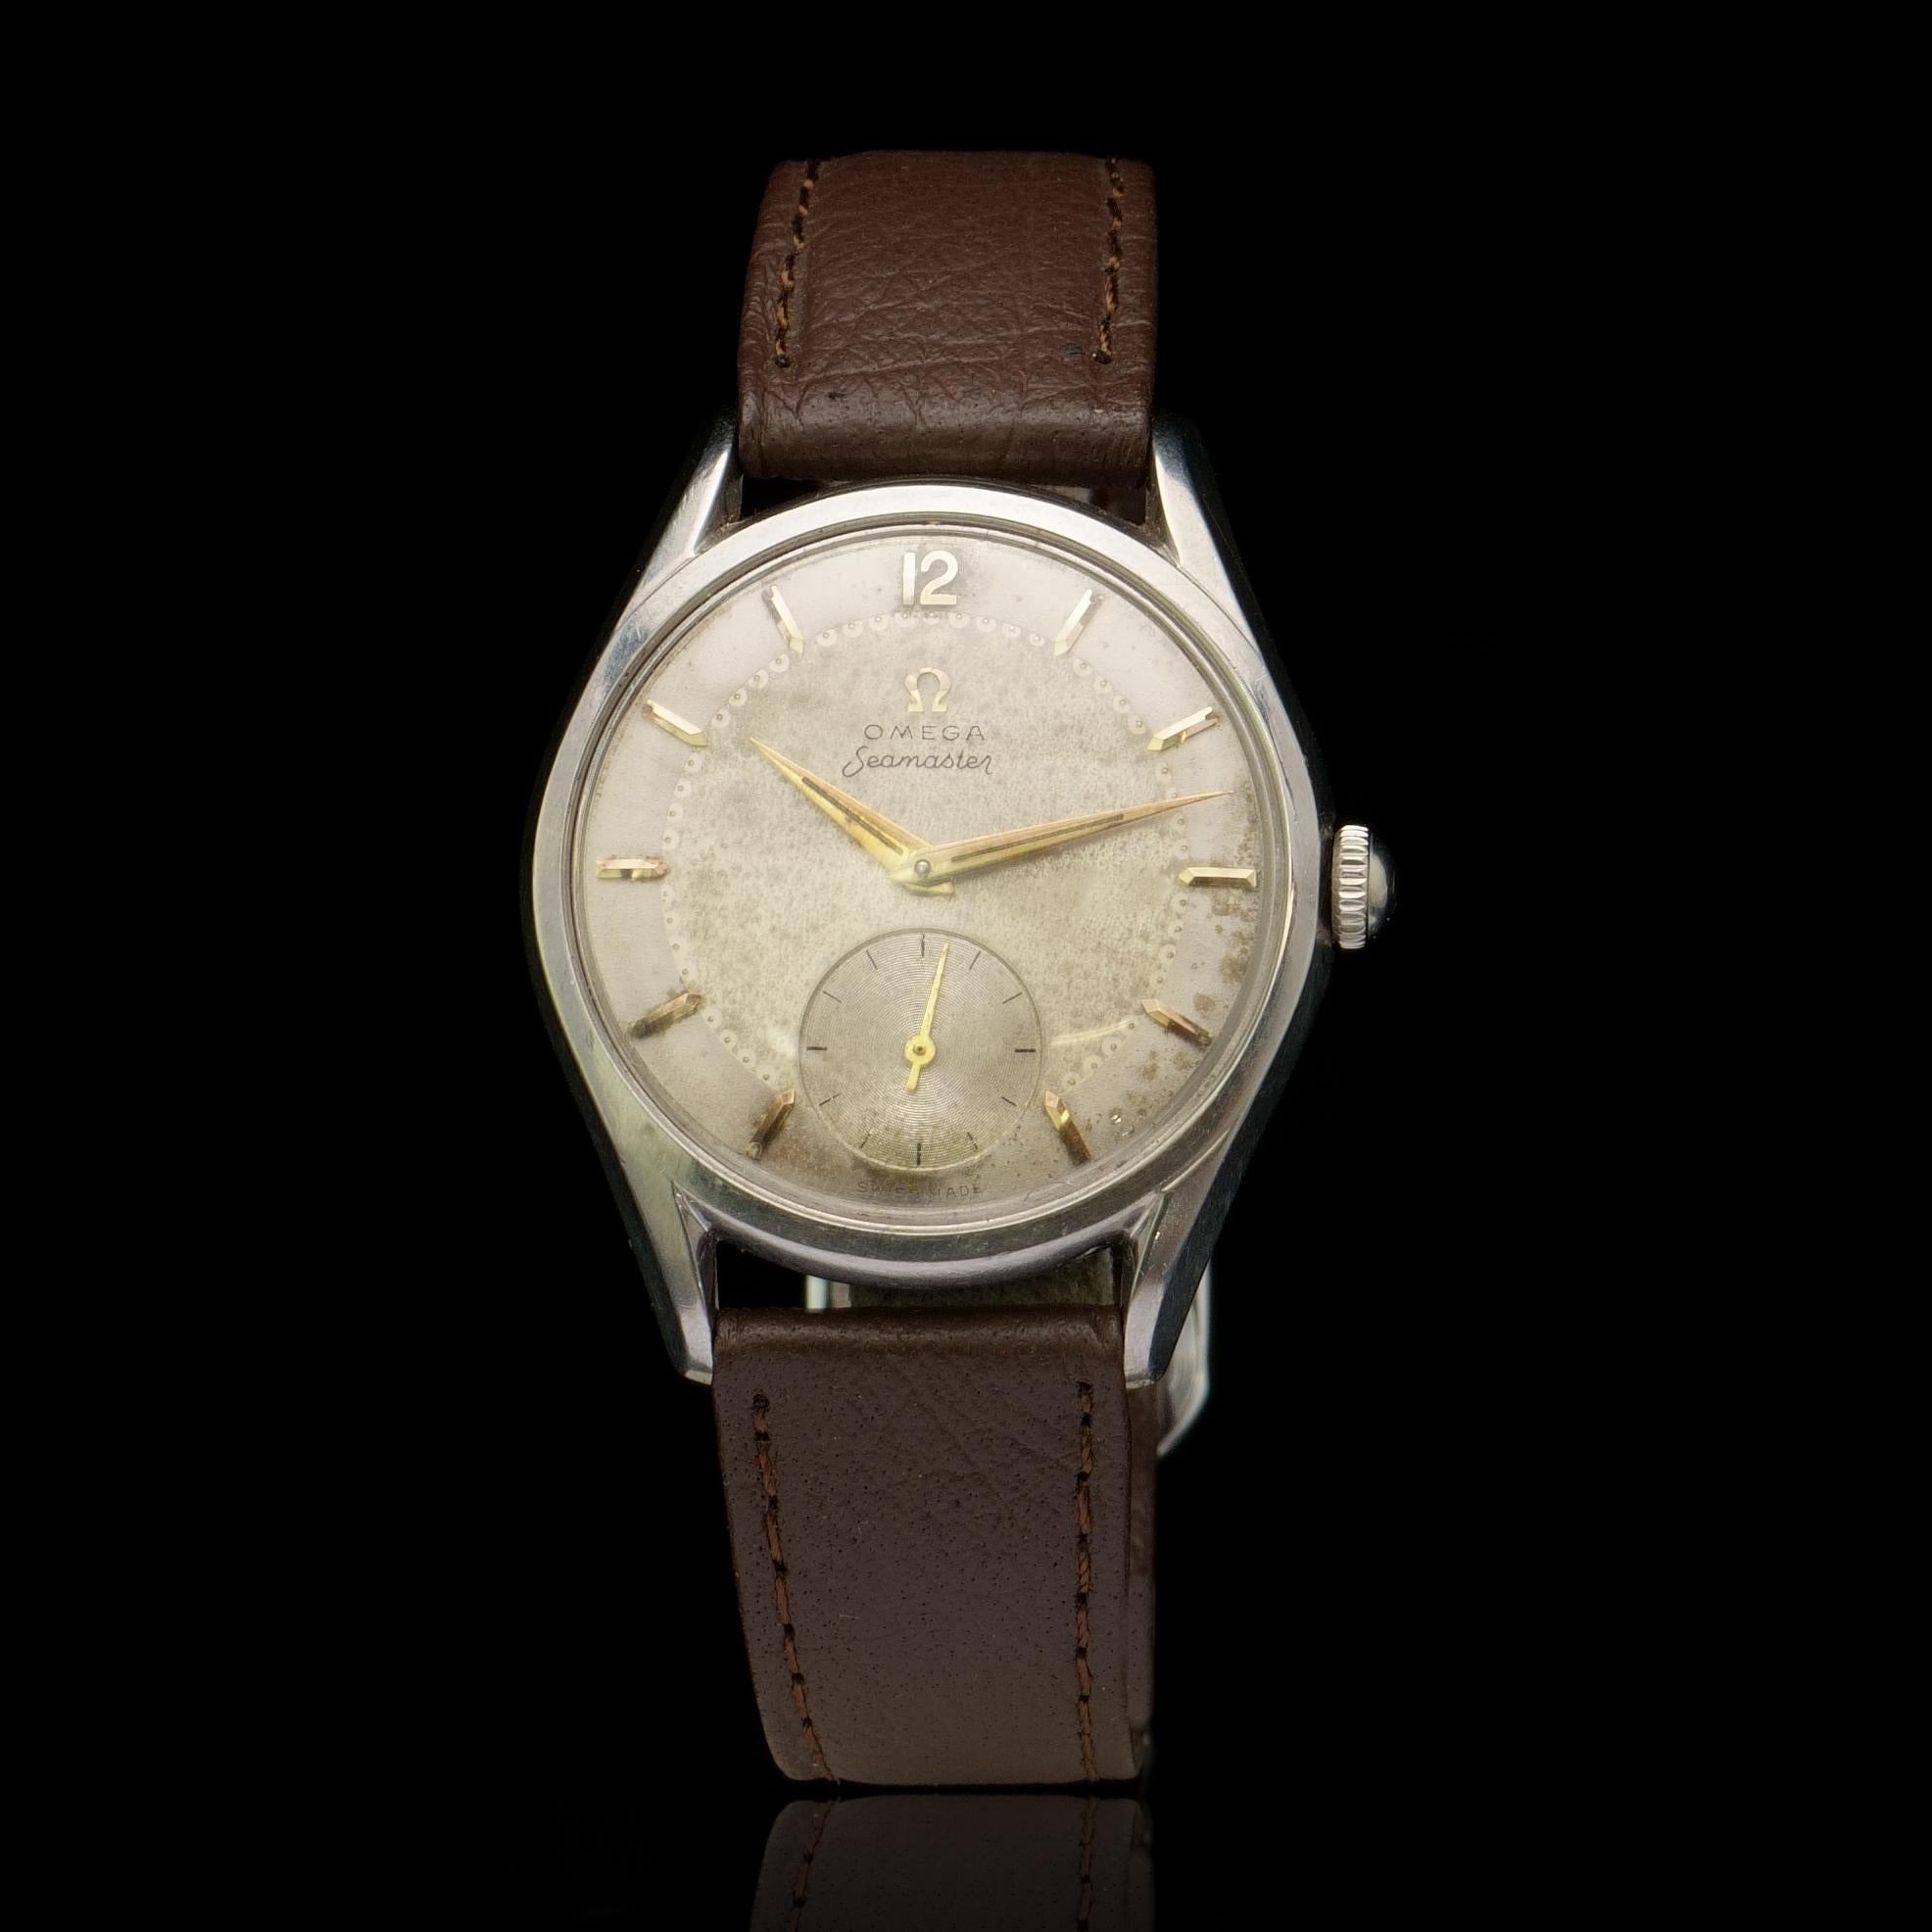 Omega Seamaster Vintage Wristwatch
Made in 1950's//1960's

Movement: Manual Winding Cal 267
Case Material: Stainless Steel
Strap: Leather
Case Size: 36 mm
Weight: 37.24 grams

Condition: Like new